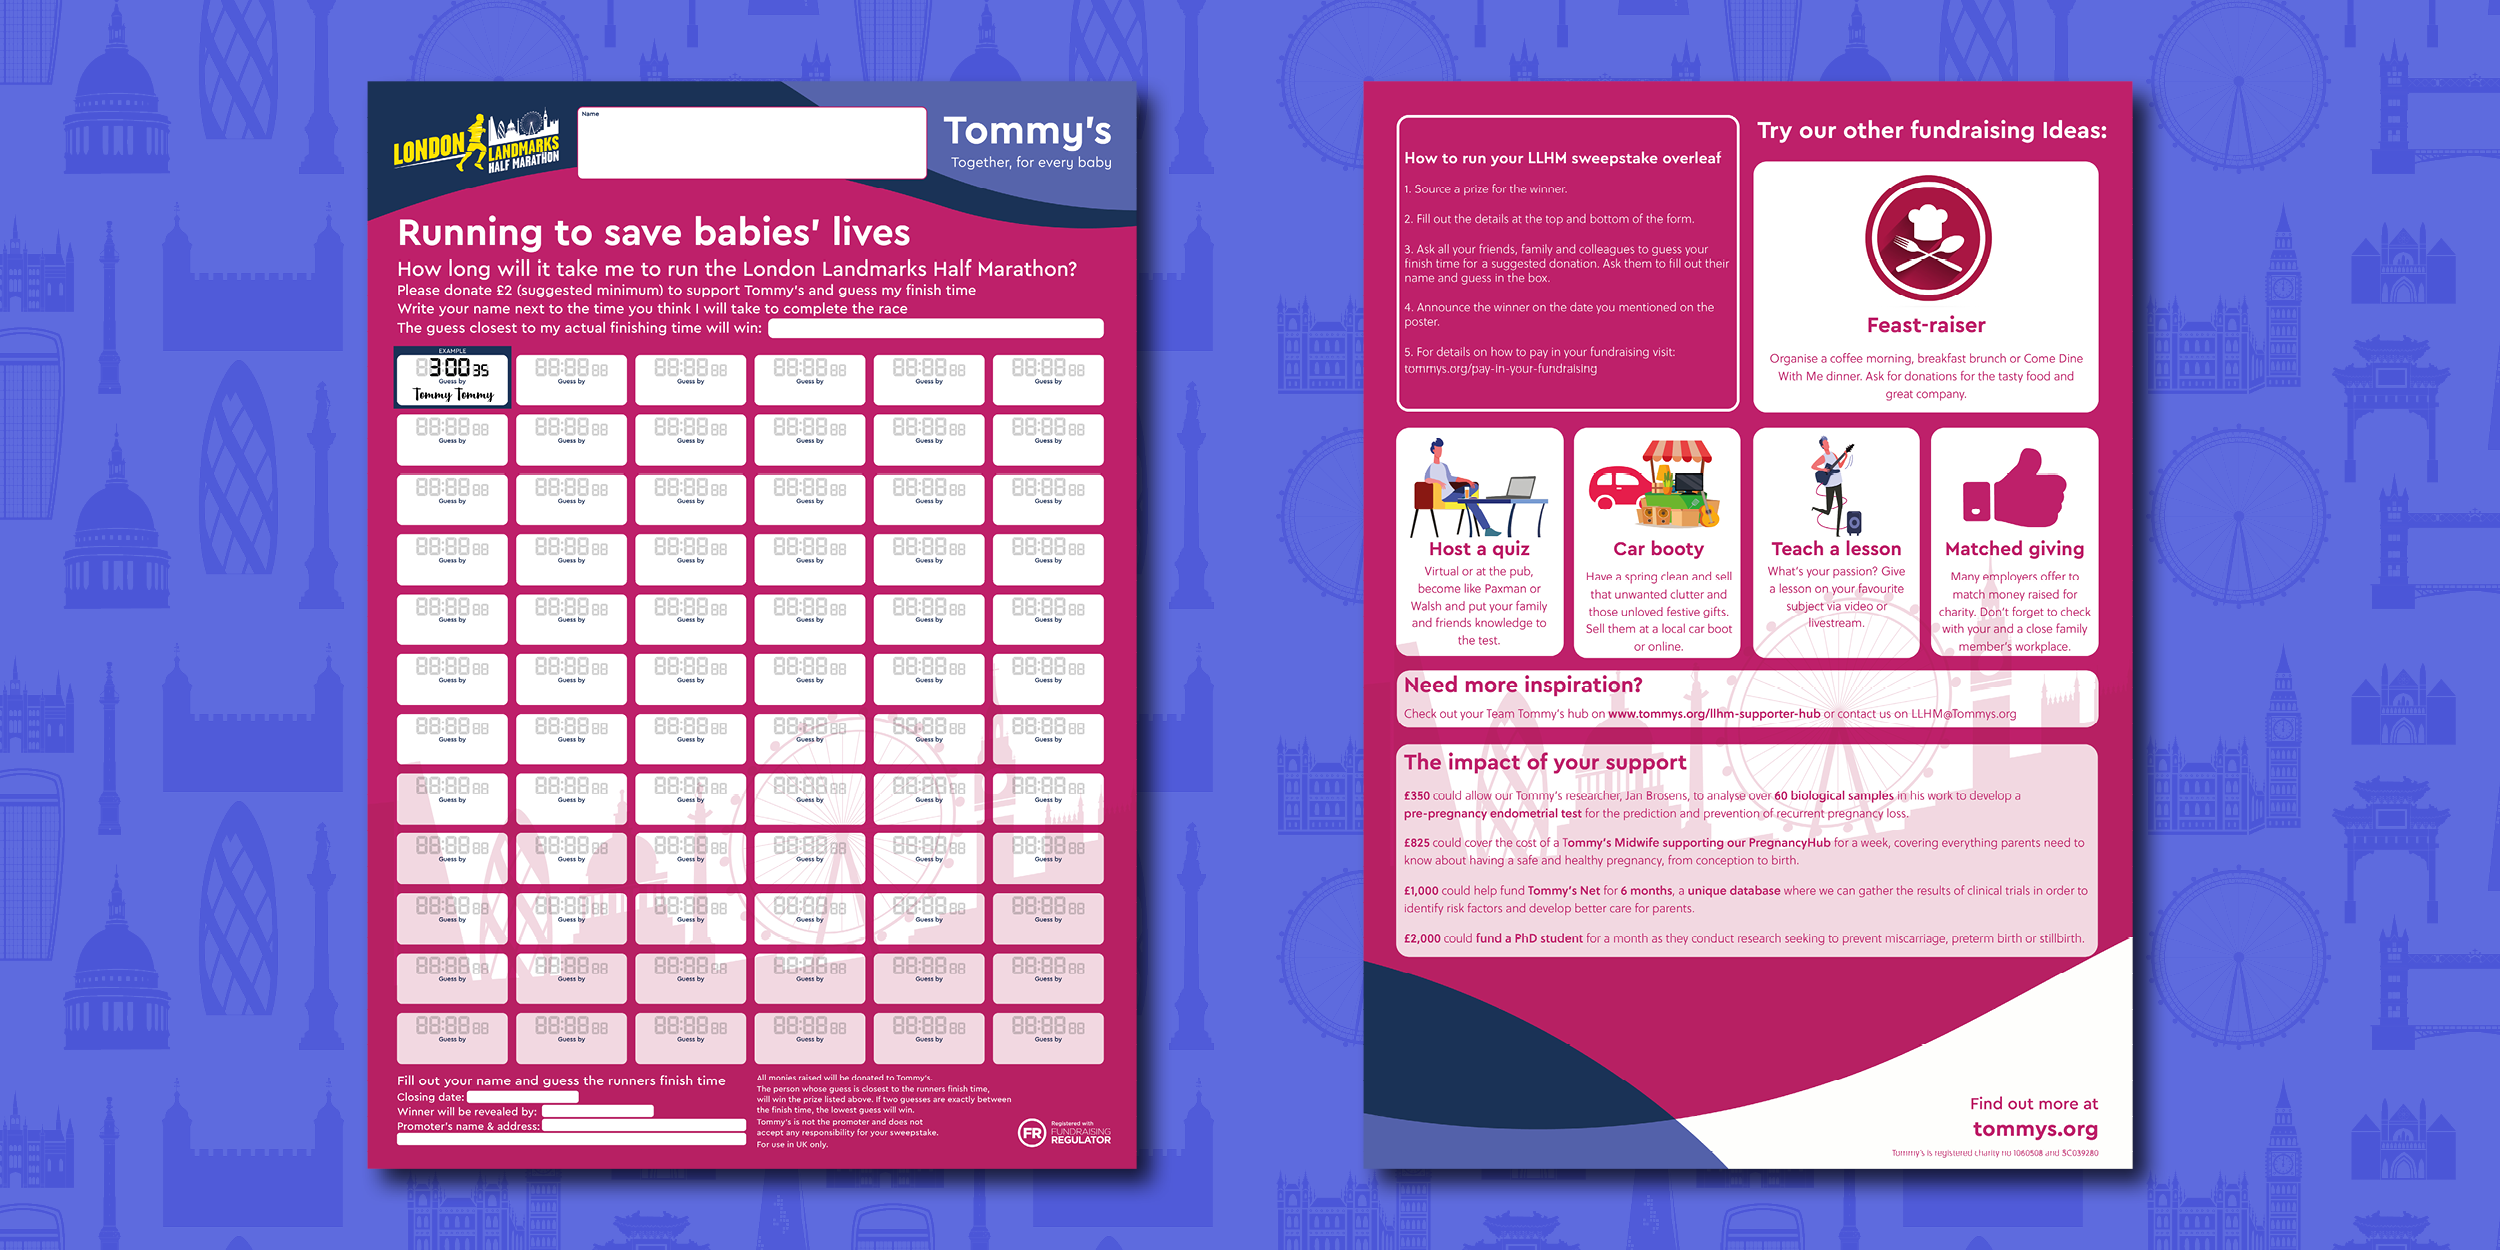 Preview of the Team Tommy's pink sweepstake, with Tommy's and LLHM logo at the top corners